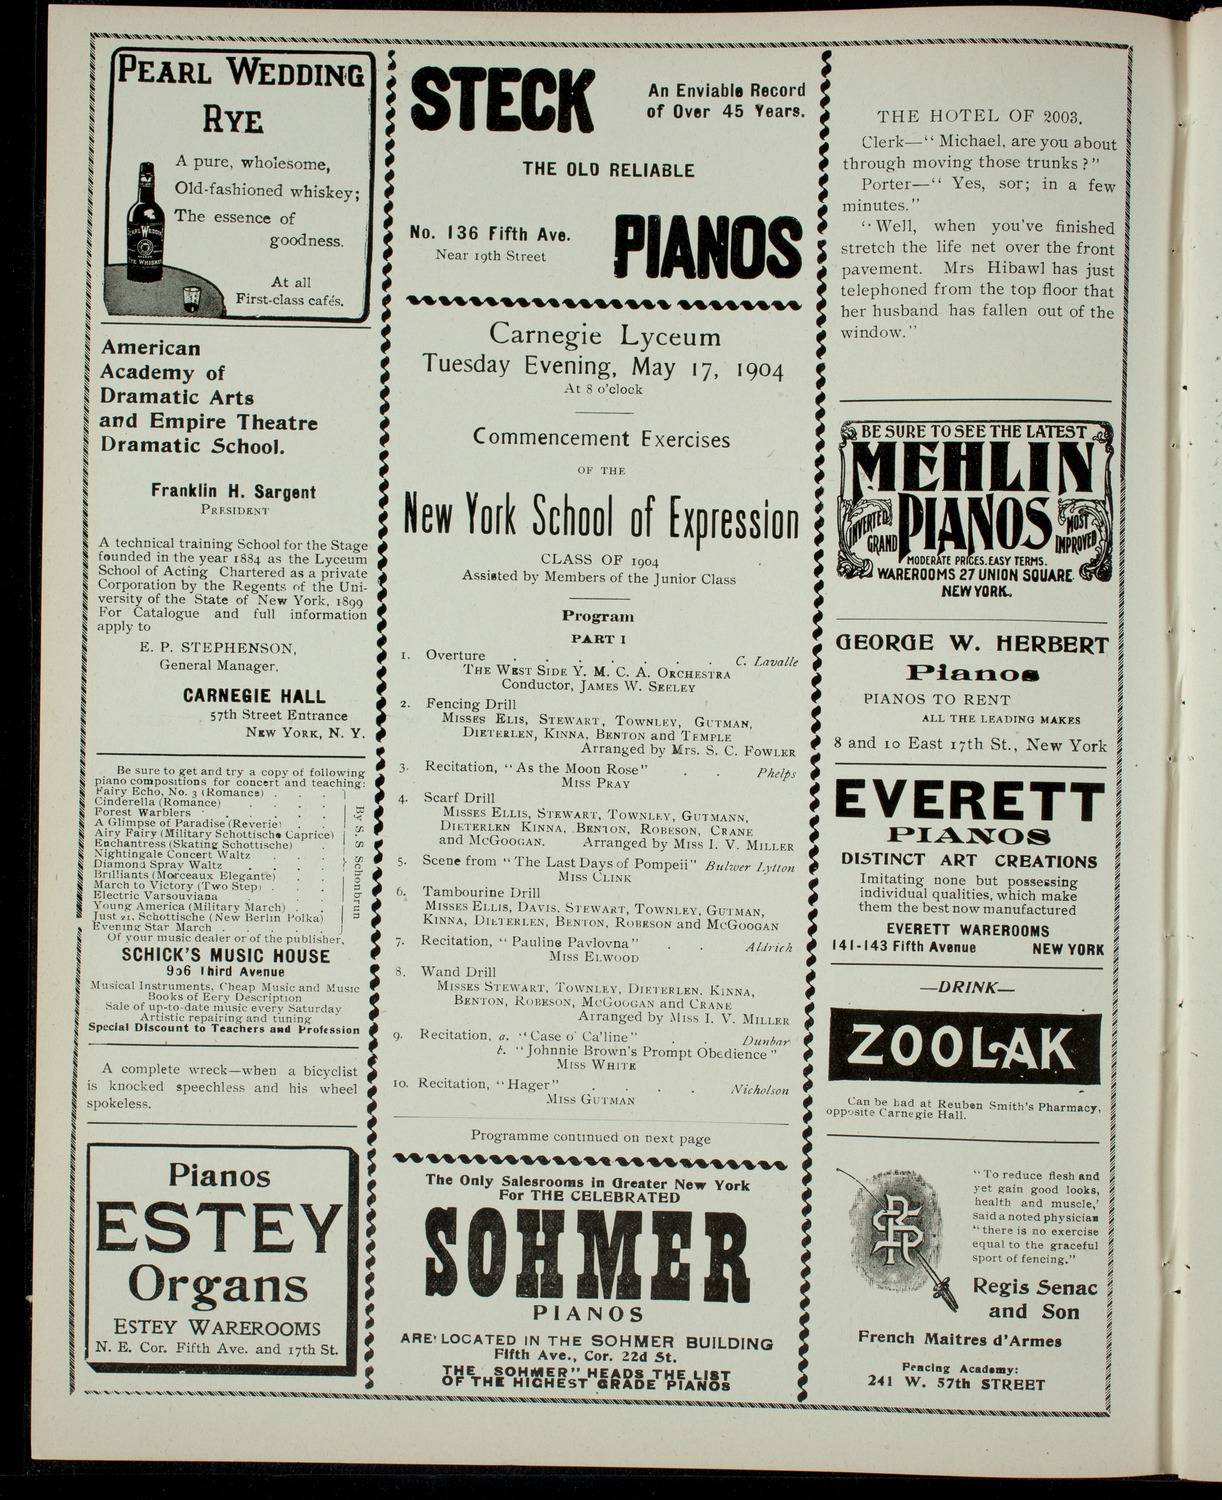 Commencement Exercises of the New York School of Expression, May 17, 1904, program page 2